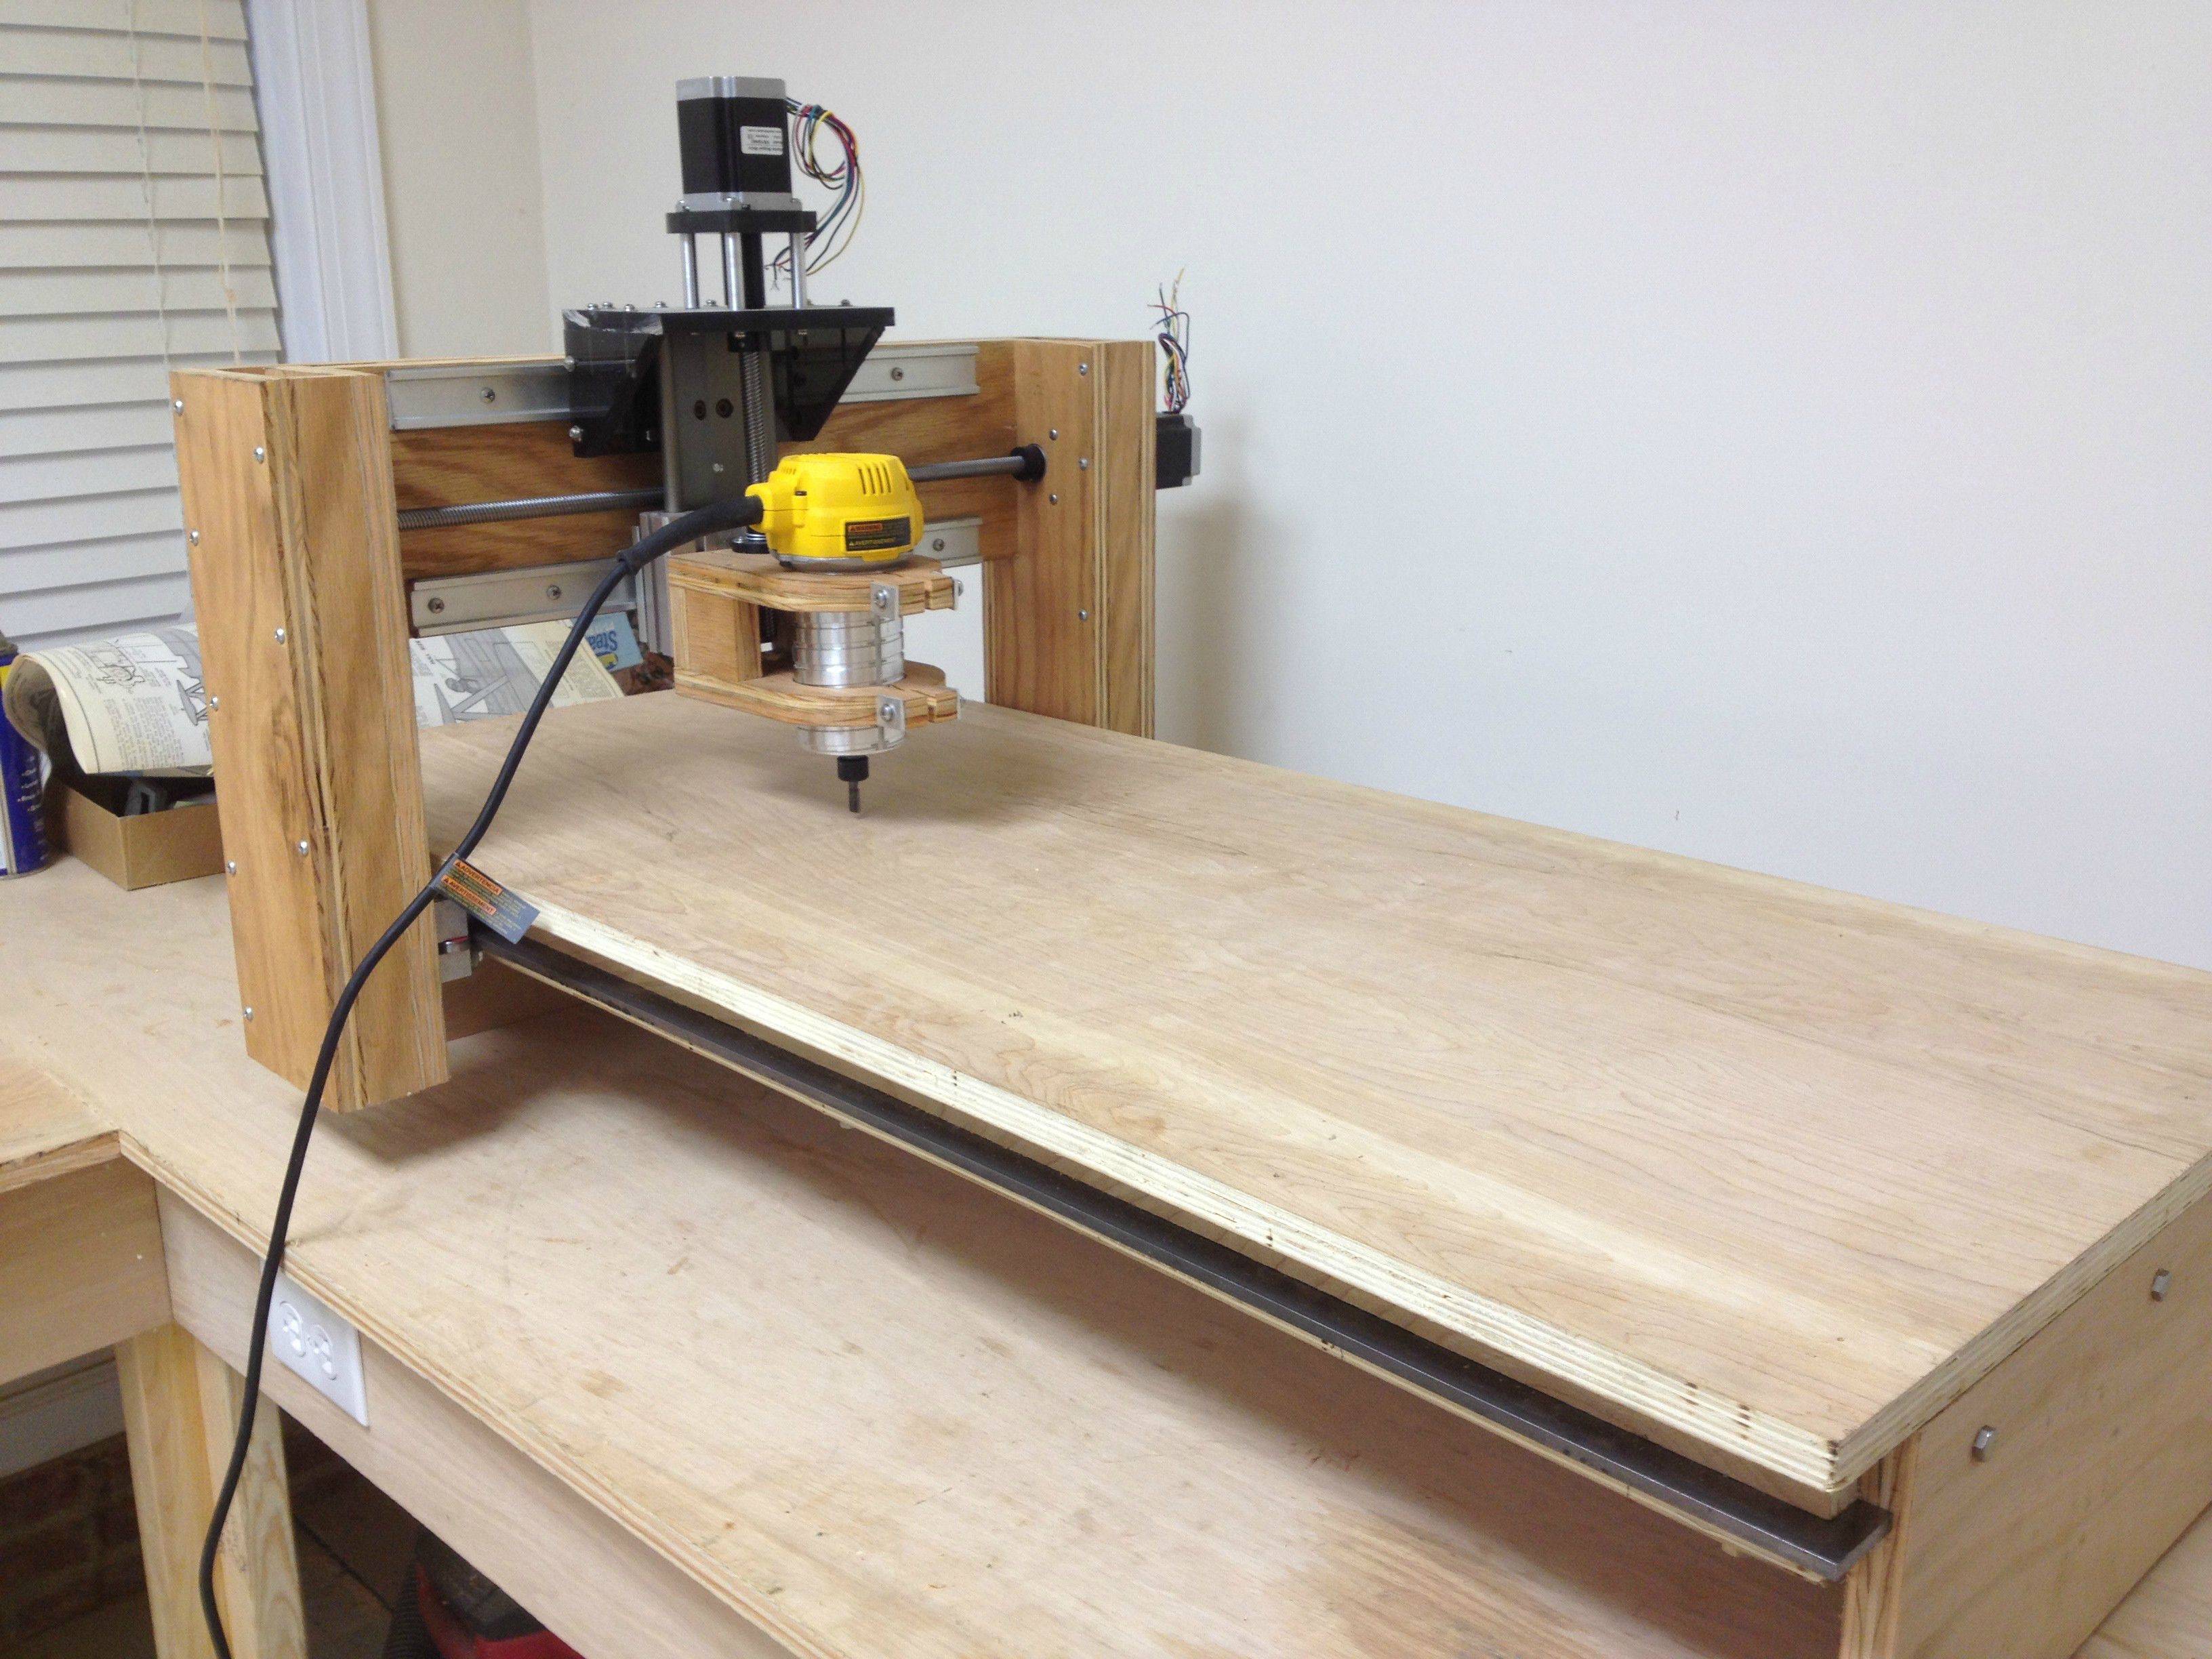 Building a Wood CNC Router From Scratch | Hackaday